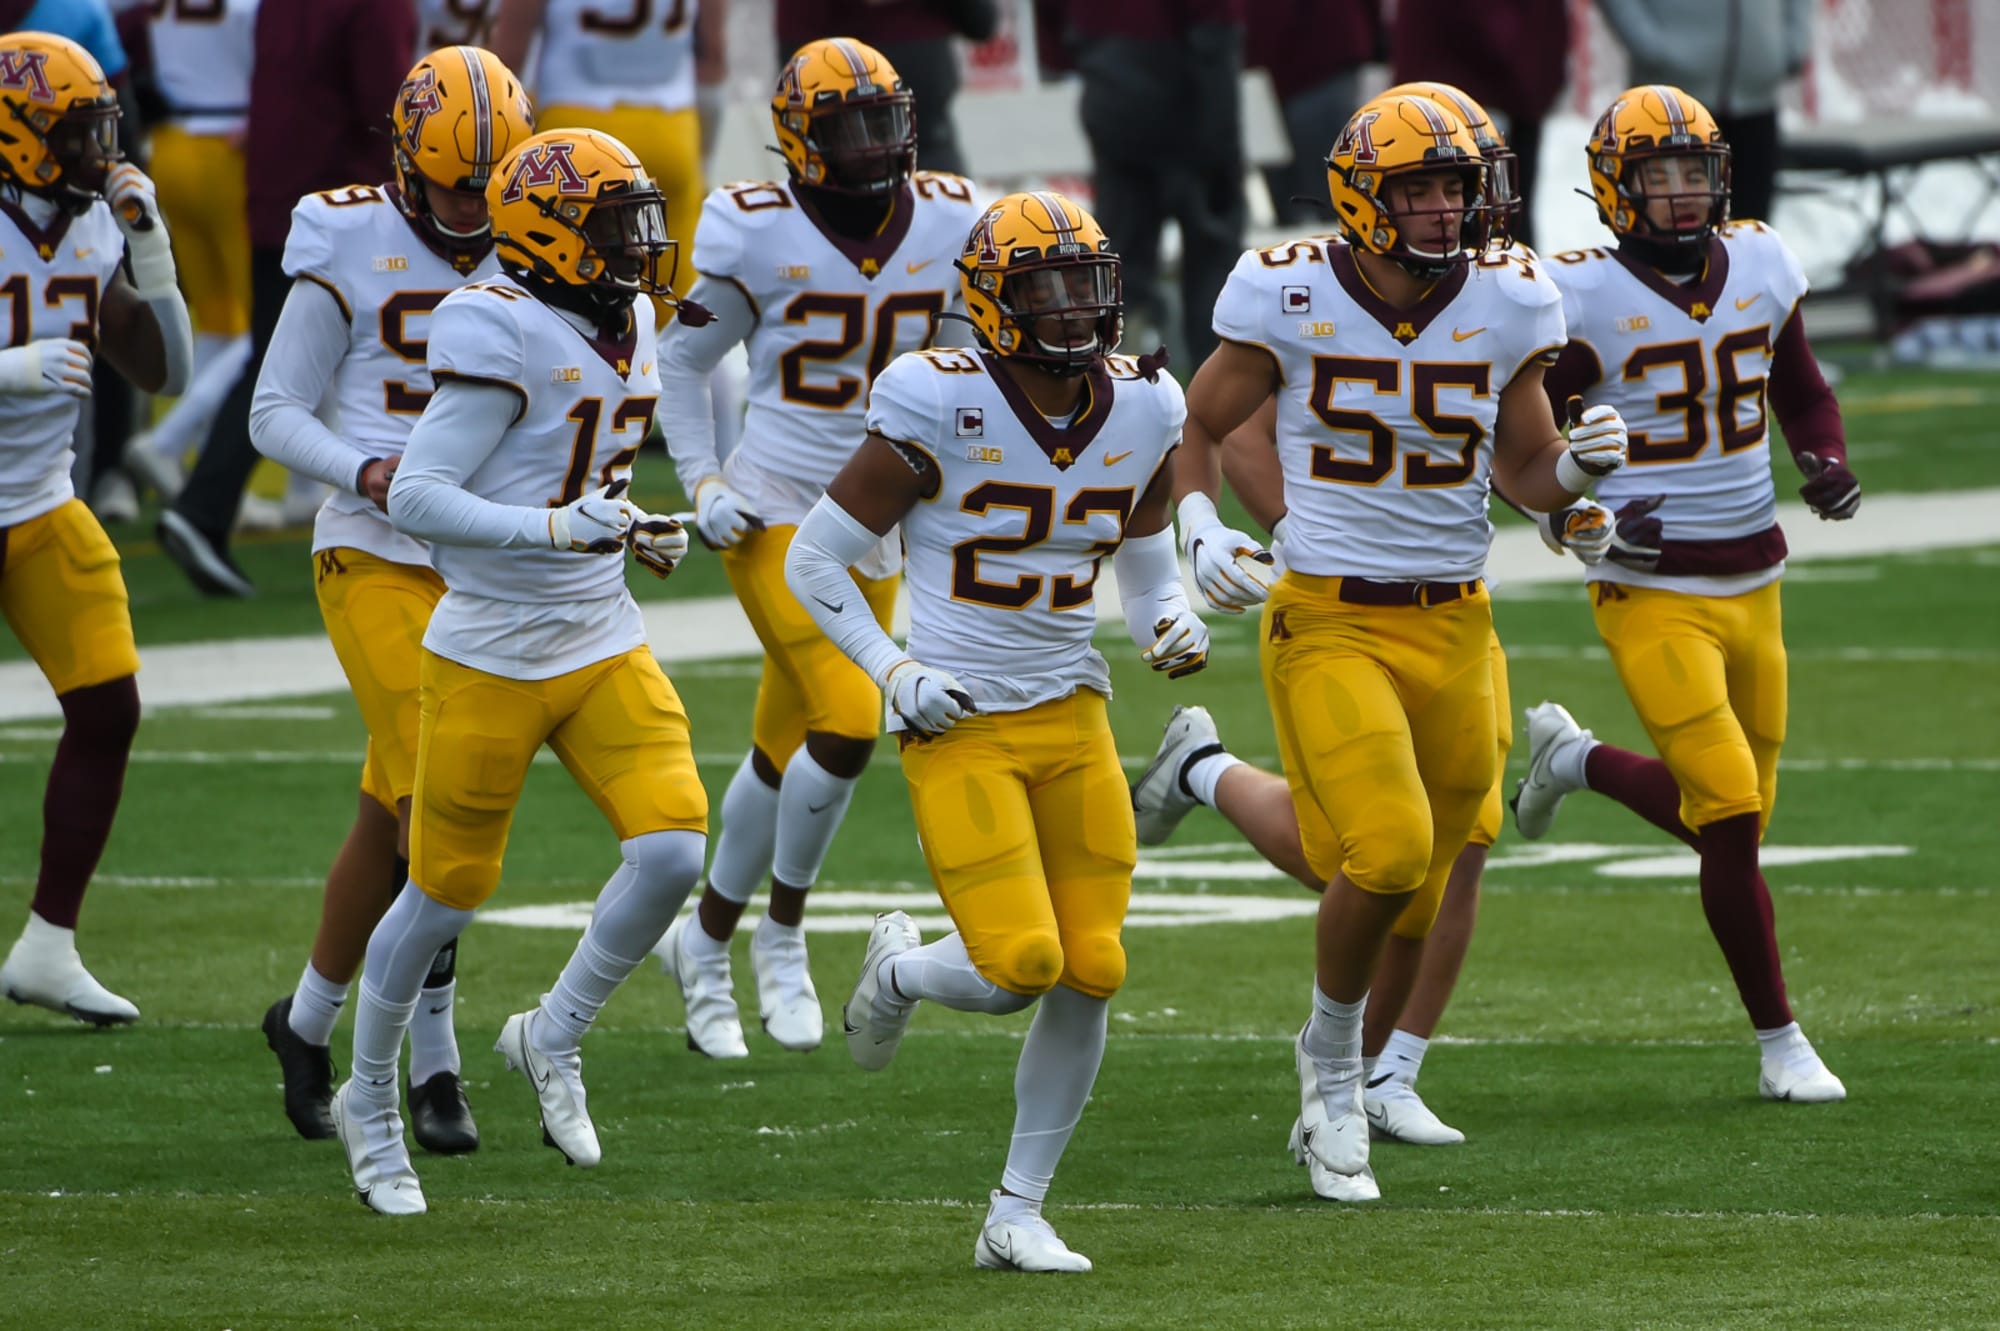 Minnesota Football vs Maryland - Week 5 Preview - The Daily Gopher